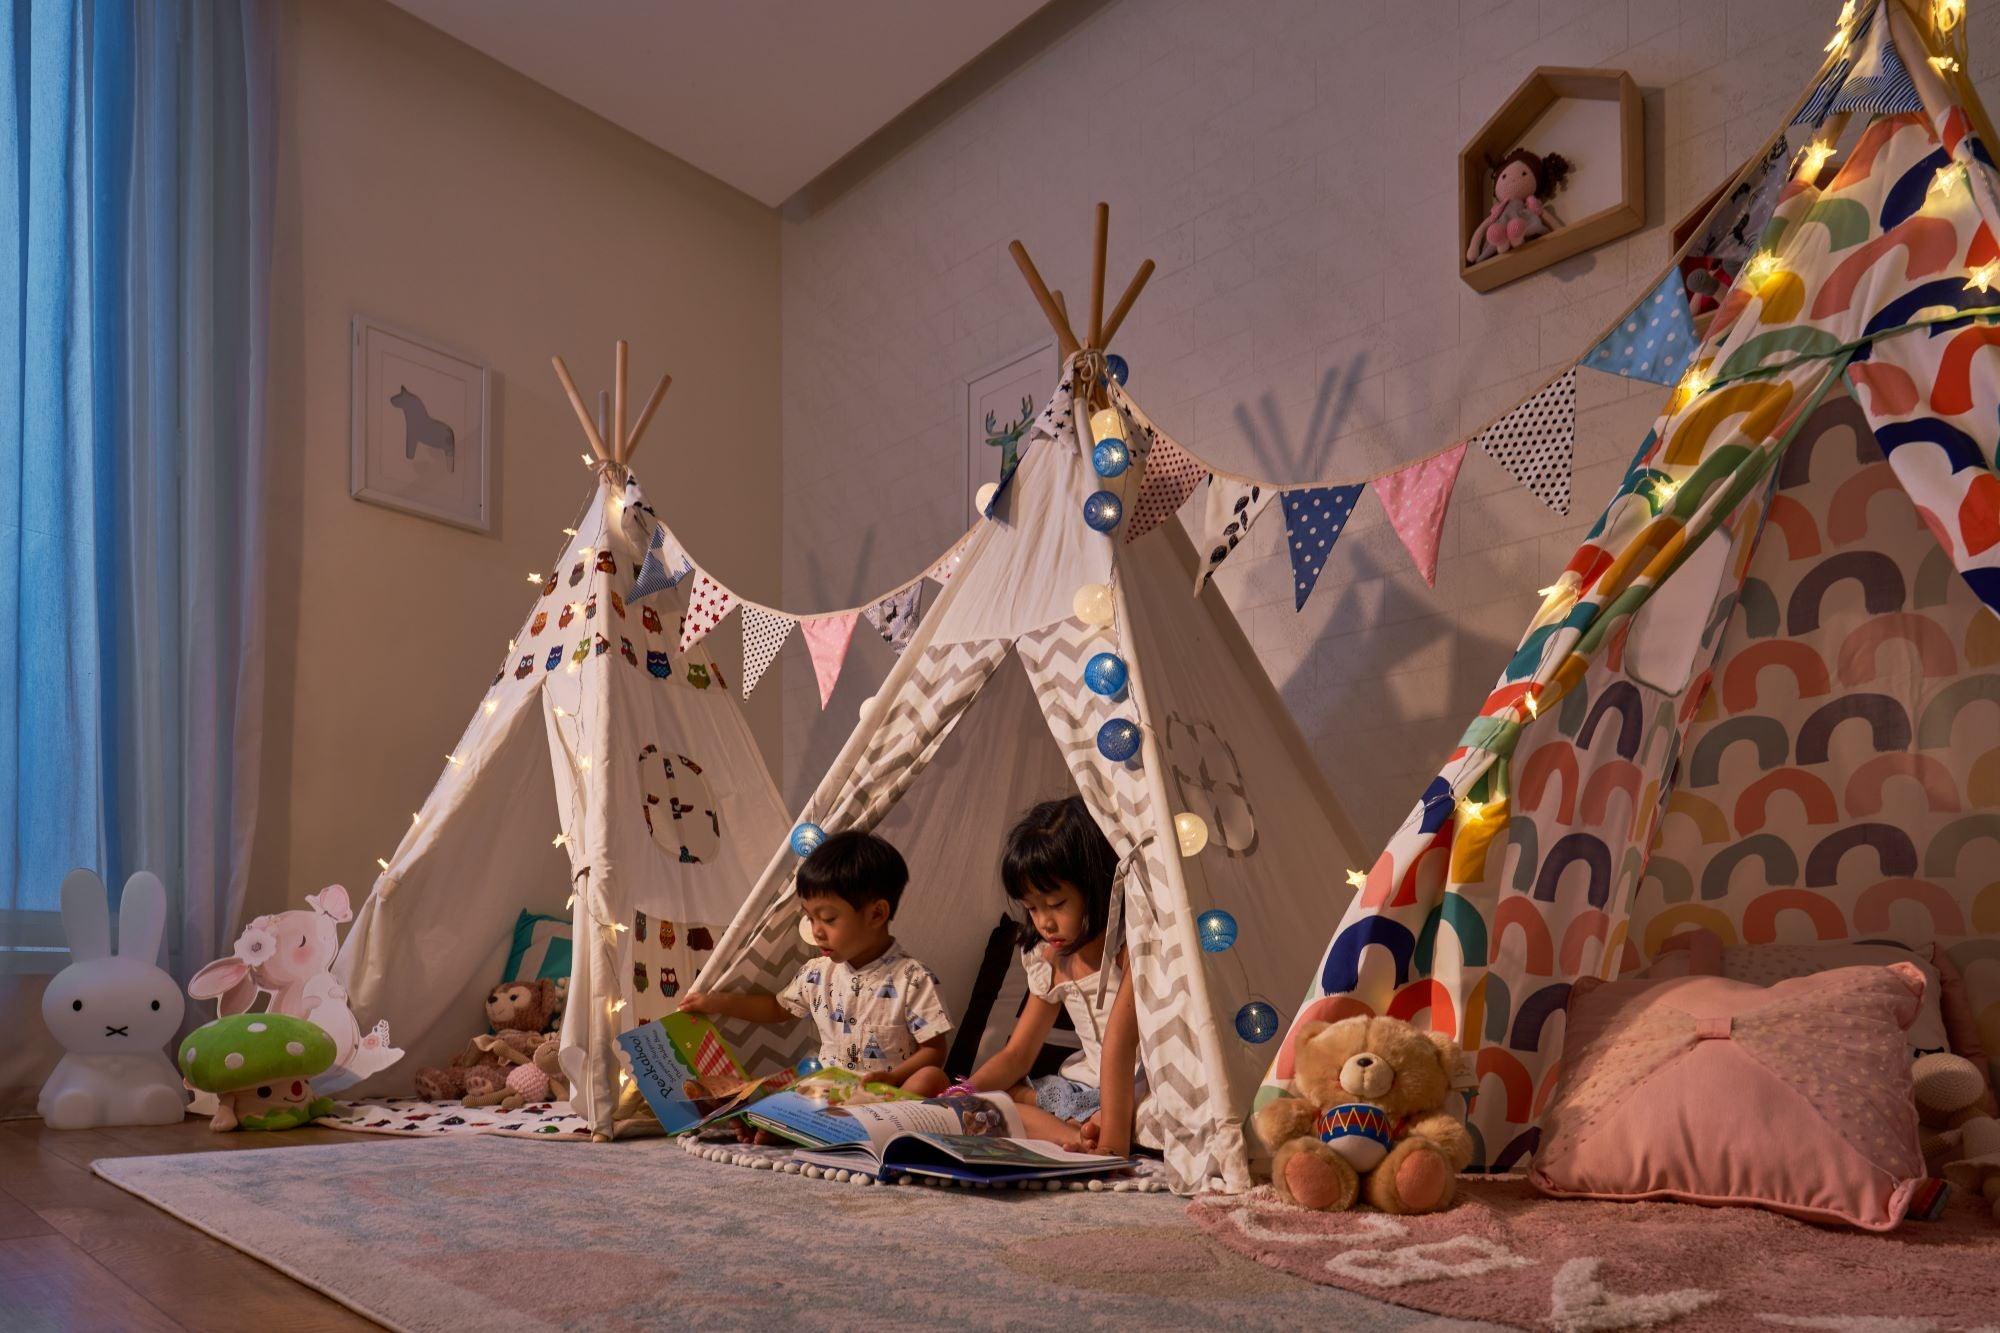 PETIT Big Owl Teepee with Mat and Lights - Kids Haven